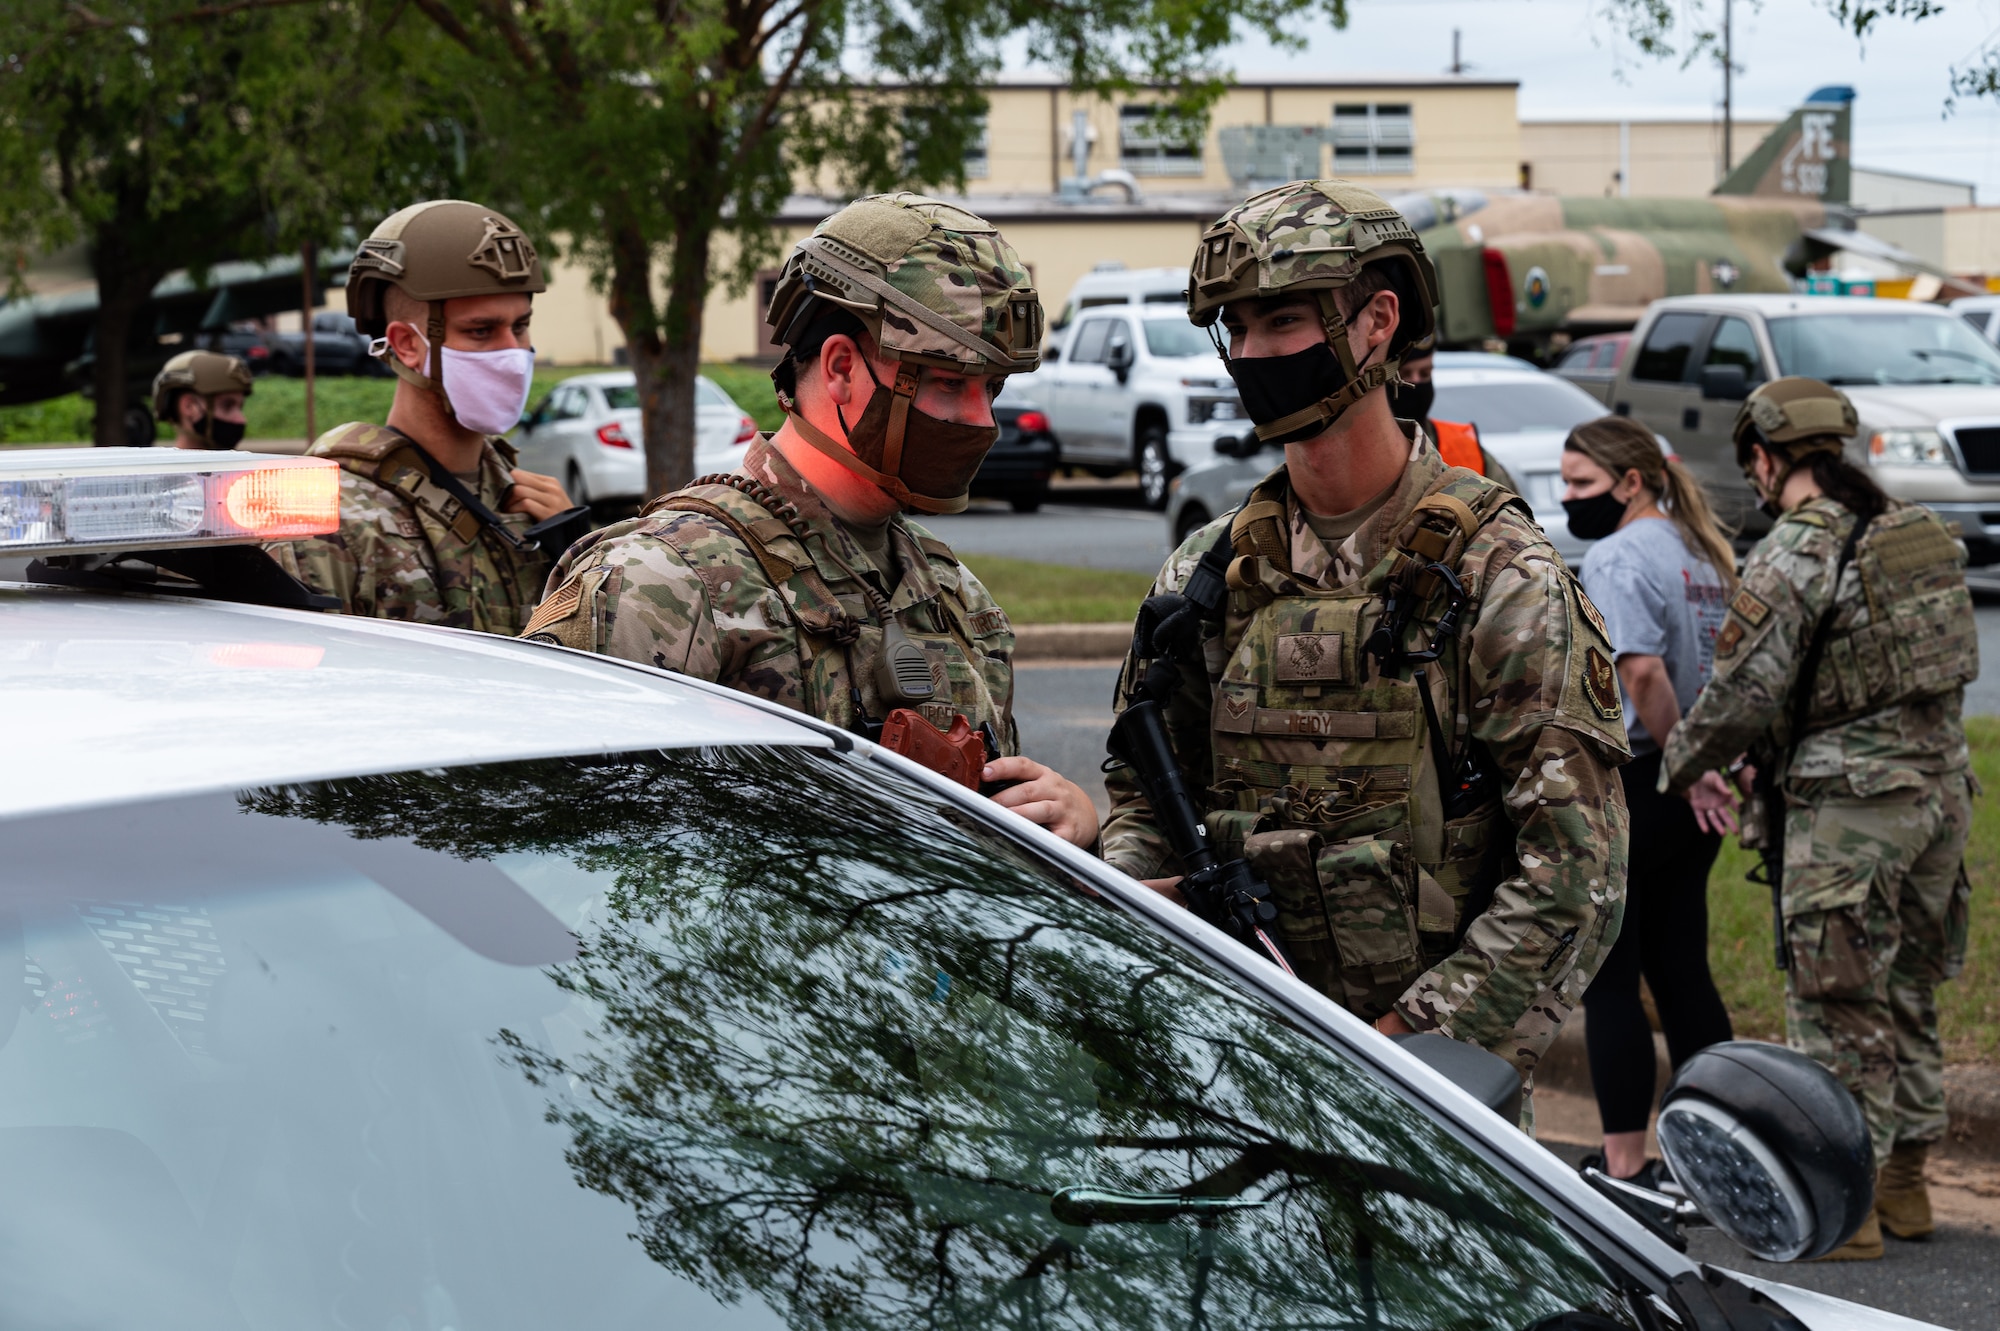 Airmen from the 2nd Security Forces Squadron regroup next to a patrol car after the extraction of a hostile actor during an active shooter exercise at Barksdale Air Force Base, Louisiana, Sept. 16, 2021. The 2nd SFS Airmen are the first to respond to an active shooter and they're tasked with neutralizing the threat and protecting base personnel. (U.S. Air Force photo by Airman 1st Class Jonathan E. Ramos)